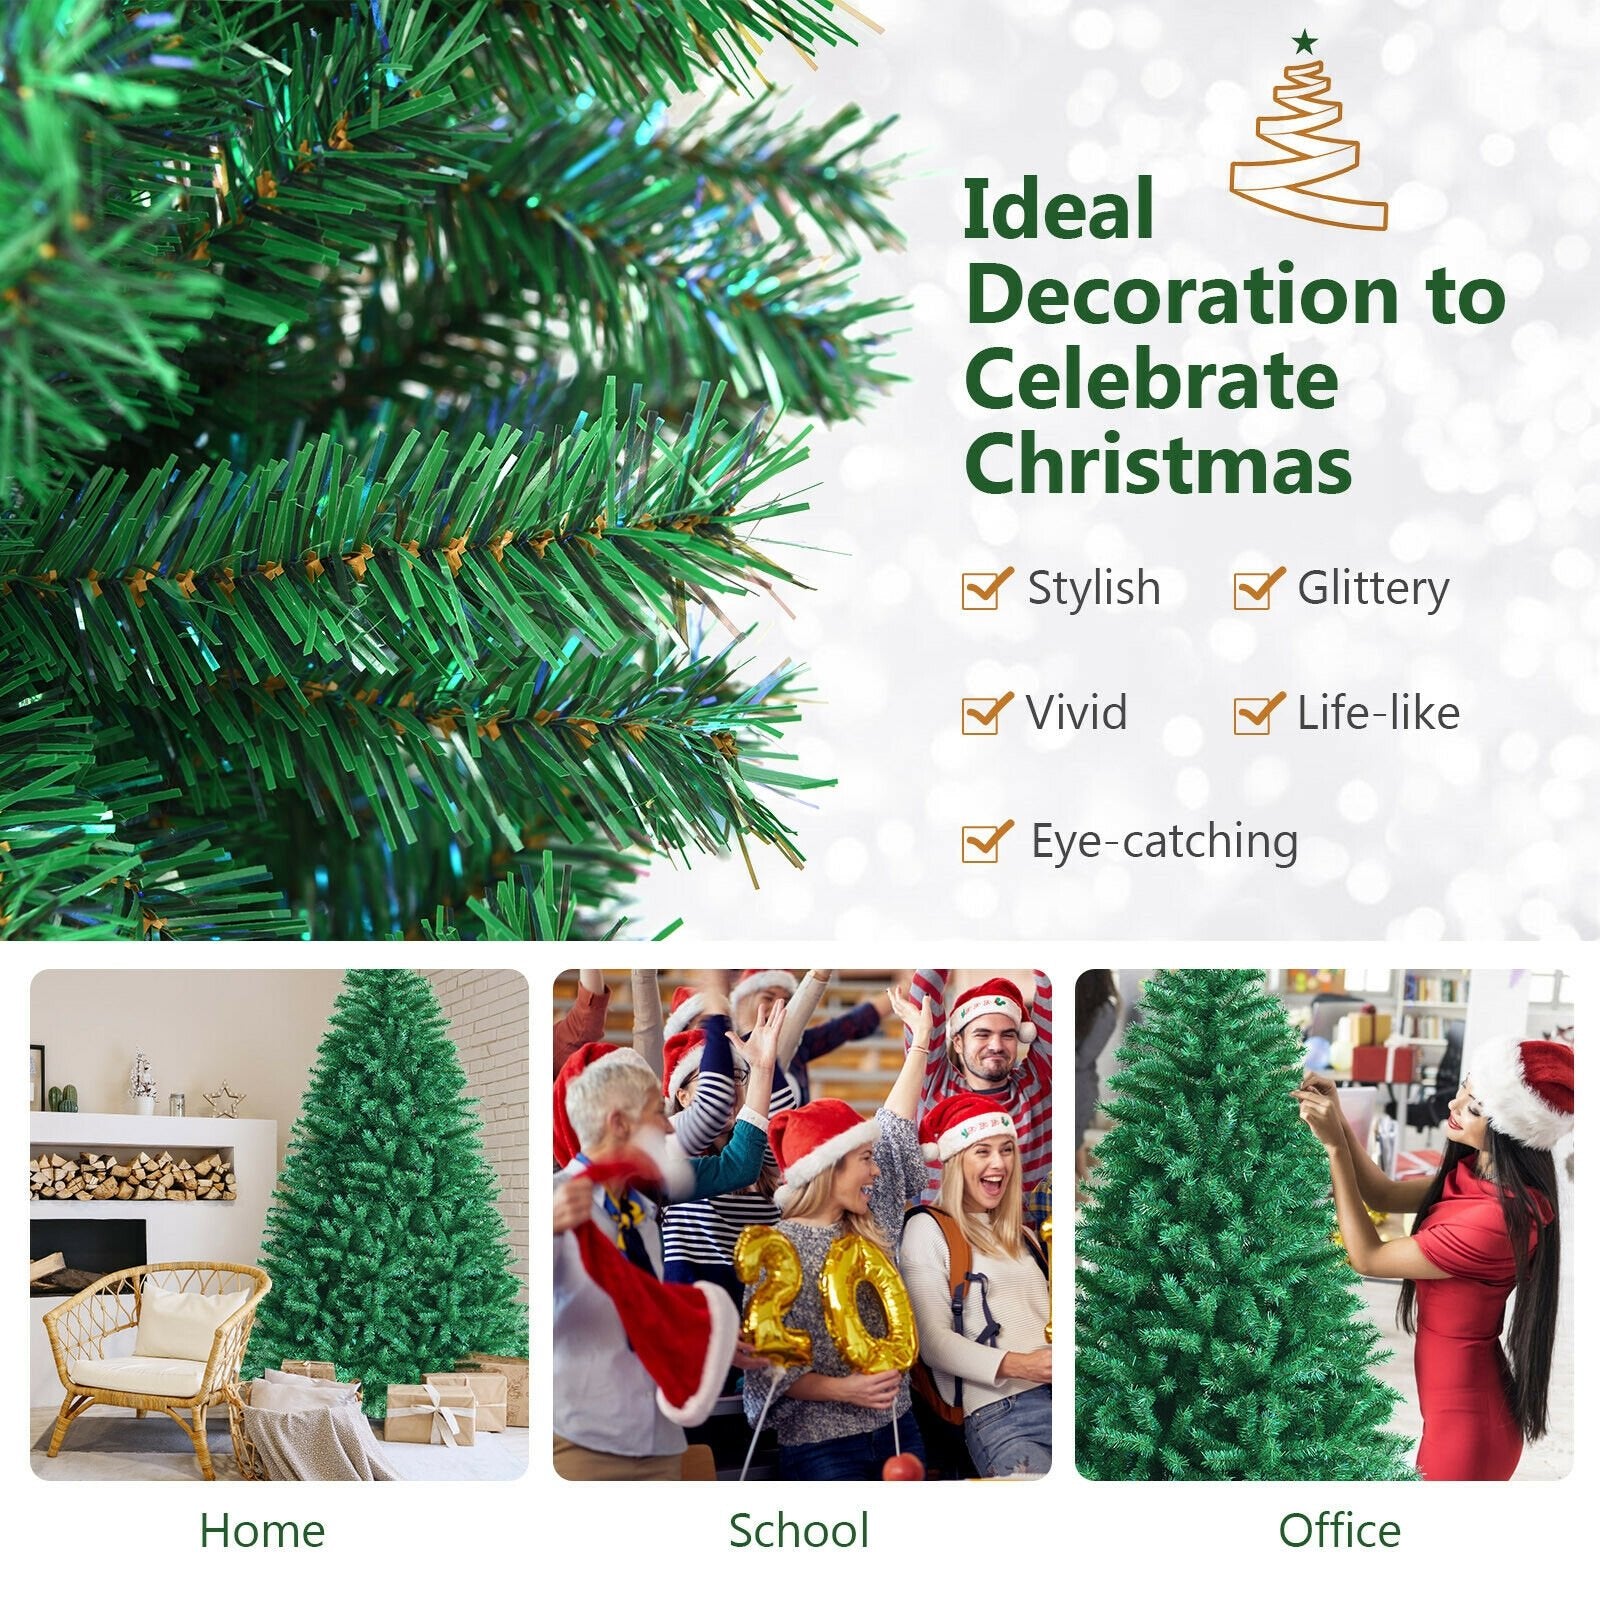 8 Feet Green Artificial Christmas Tree with 1704 Iridescent Branch Tips, Green - Gallery Canada